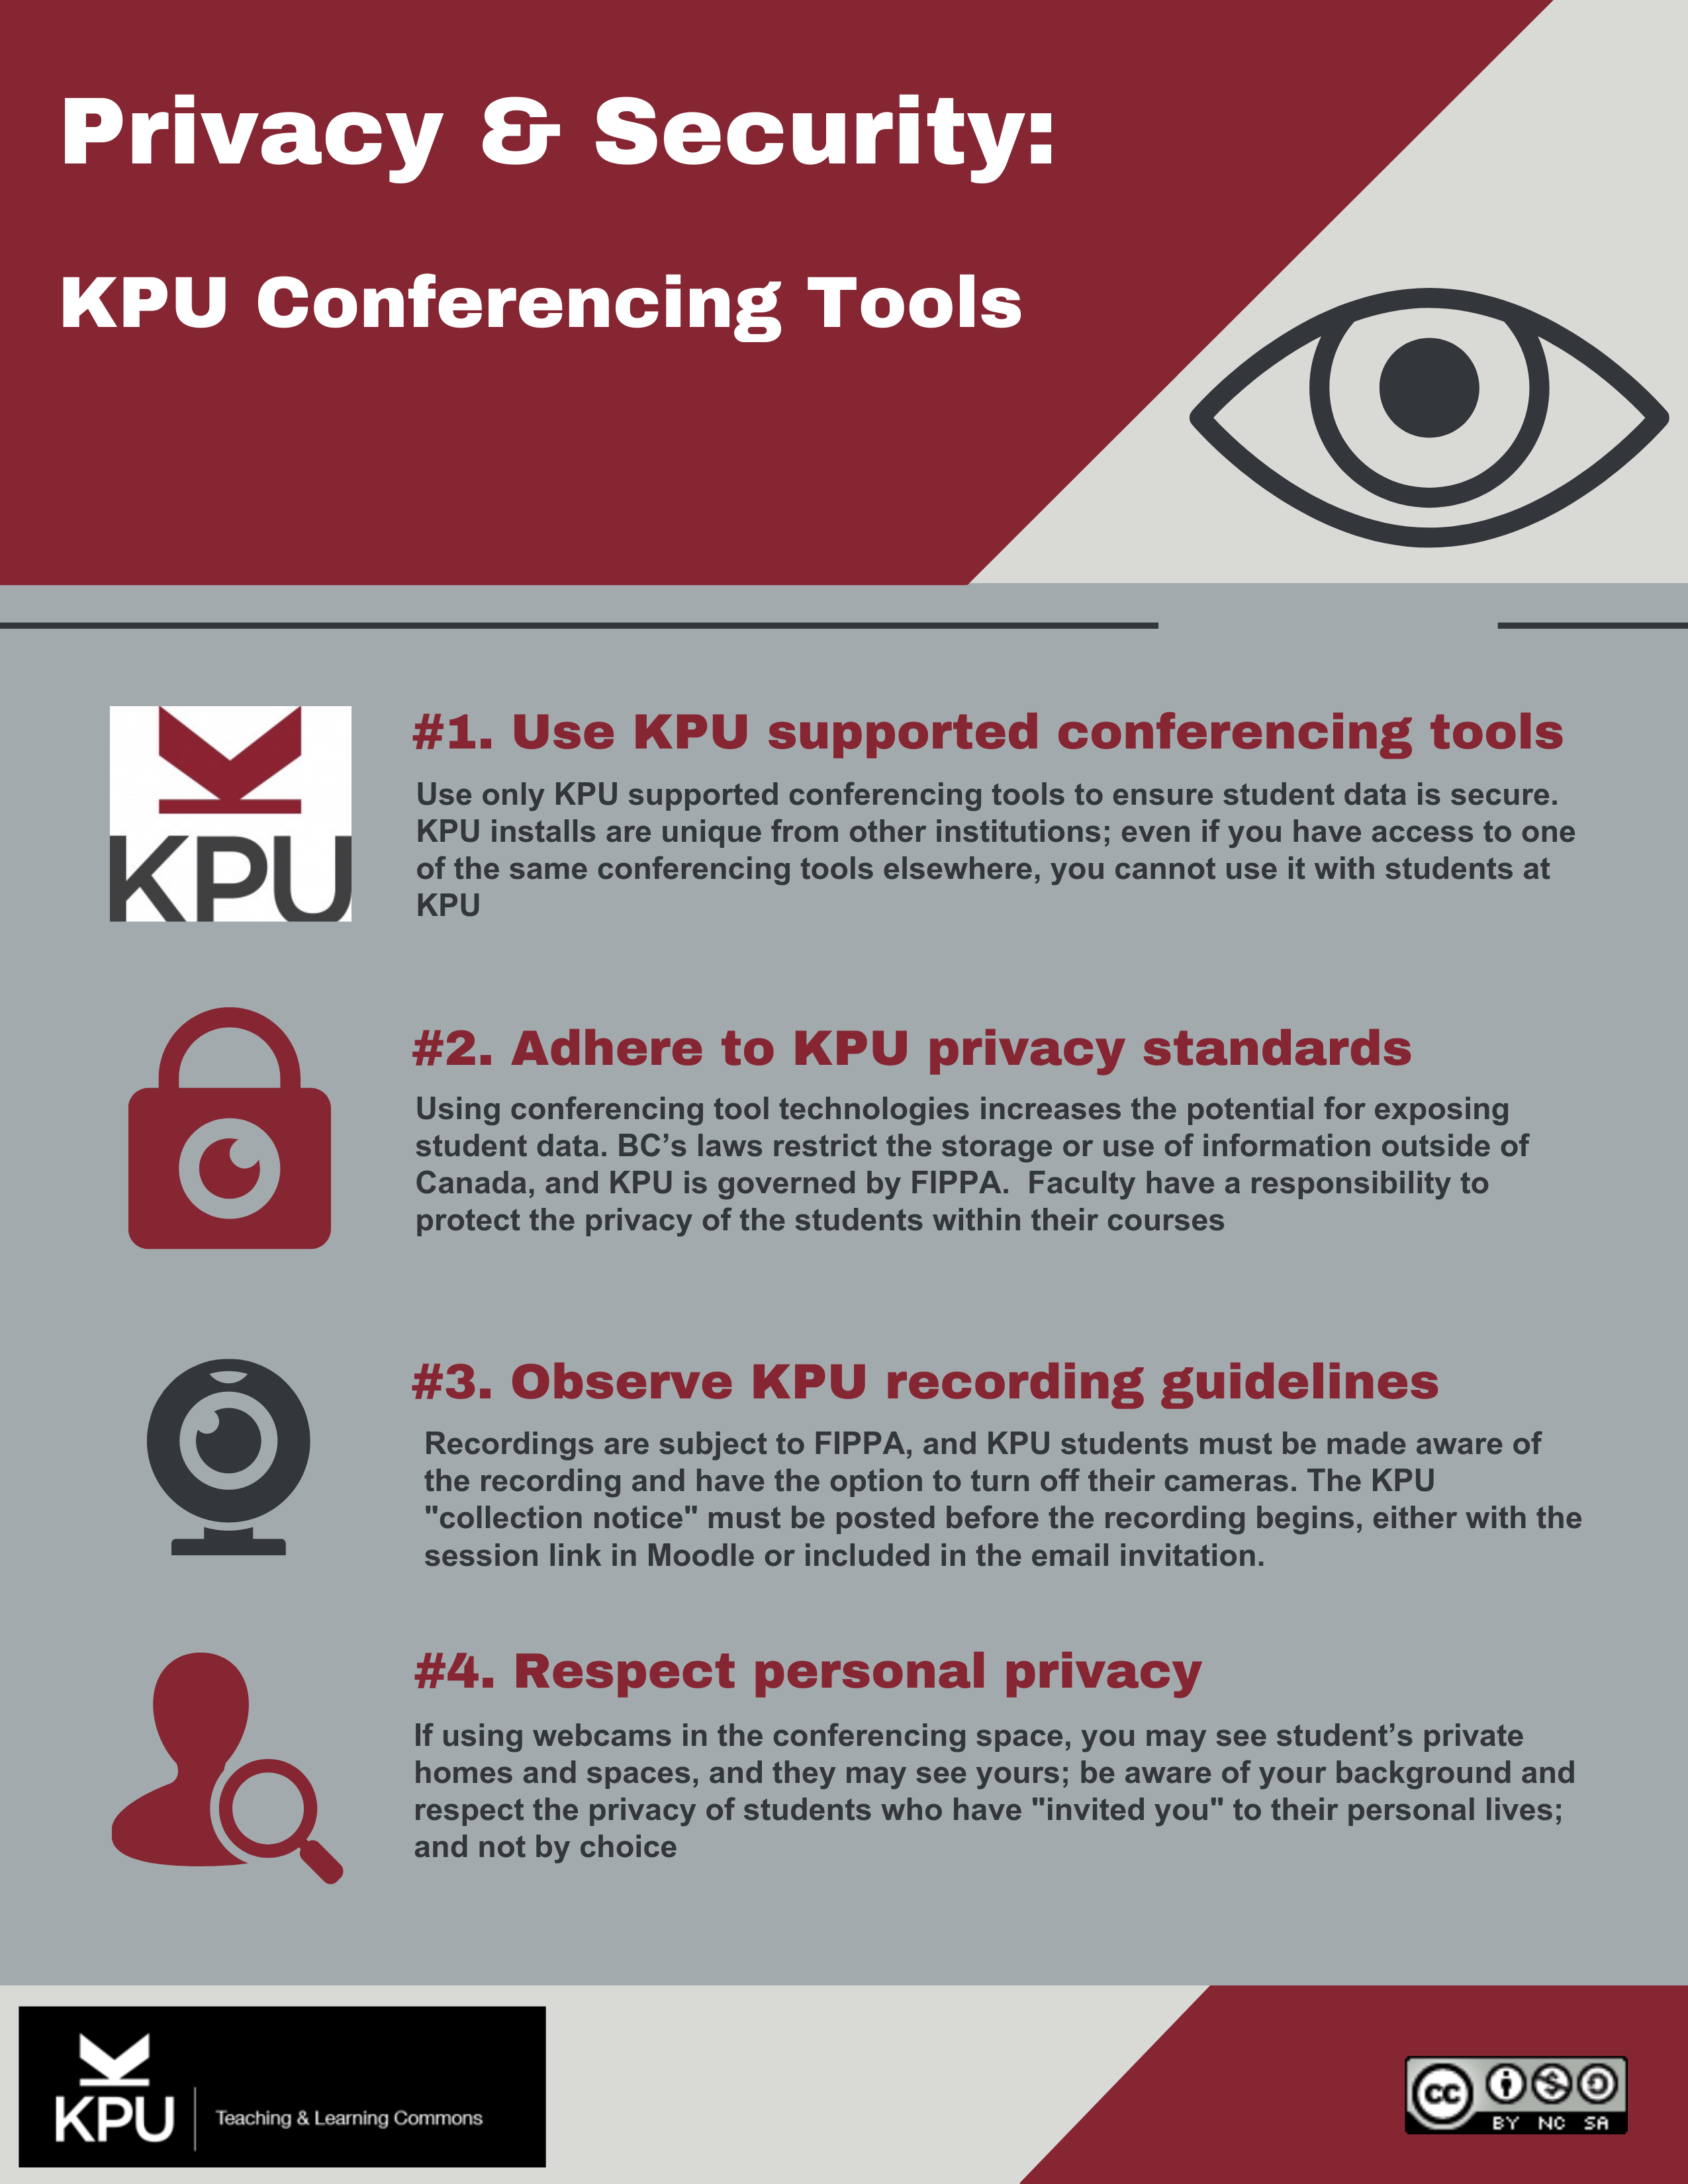 An infographic that describes 4 ways KPU faculty and staff can support privacy and security